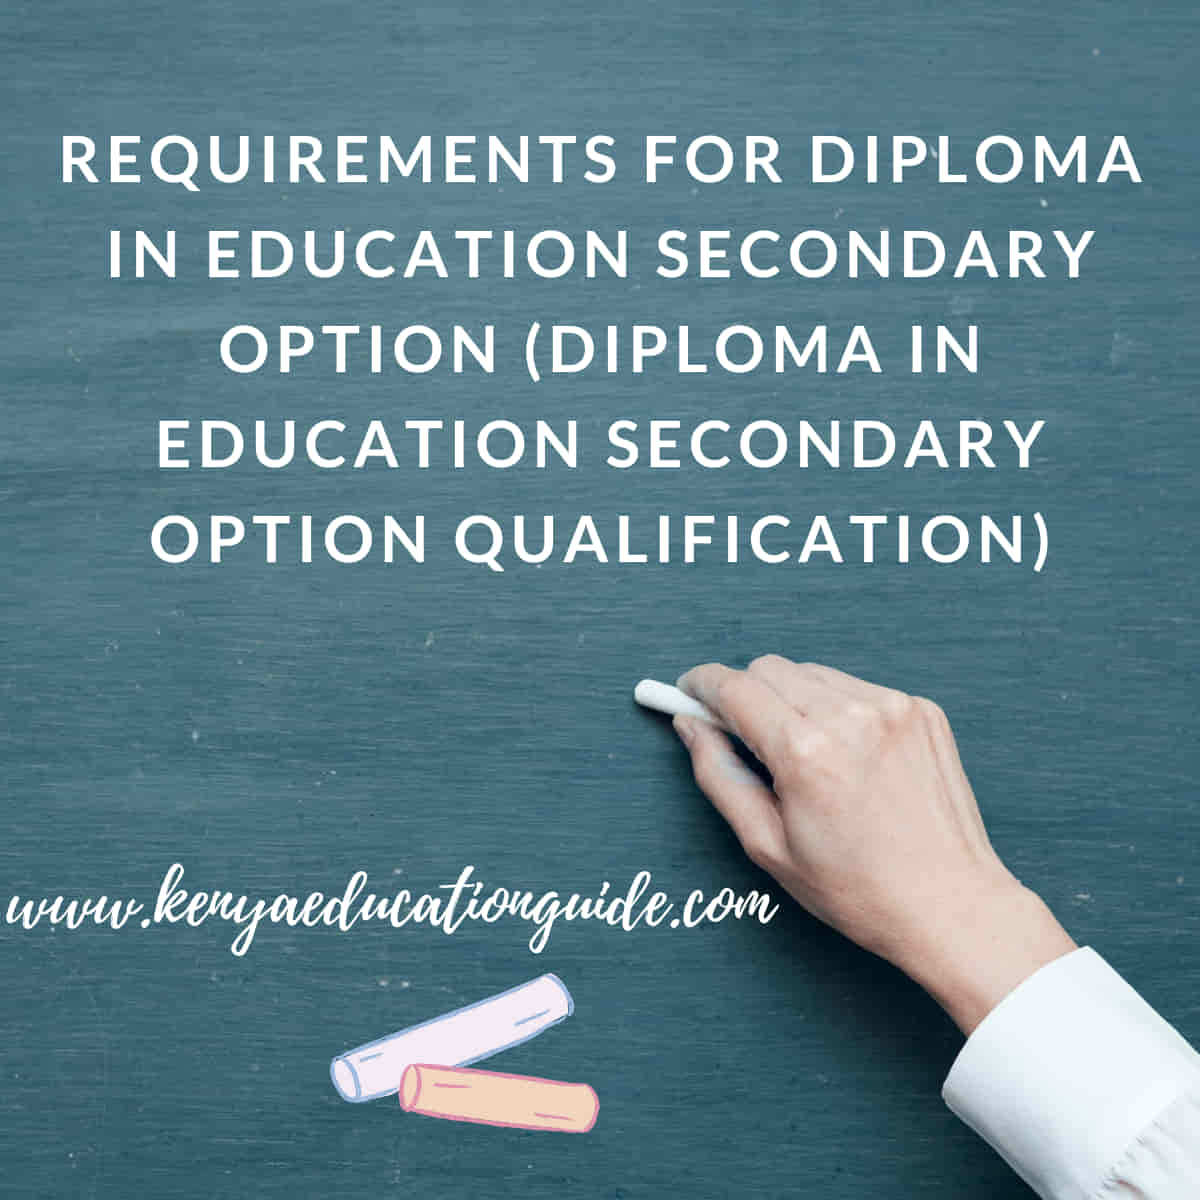 Requirements for diploma in education secondary option (diploma in education secondary option qualification)